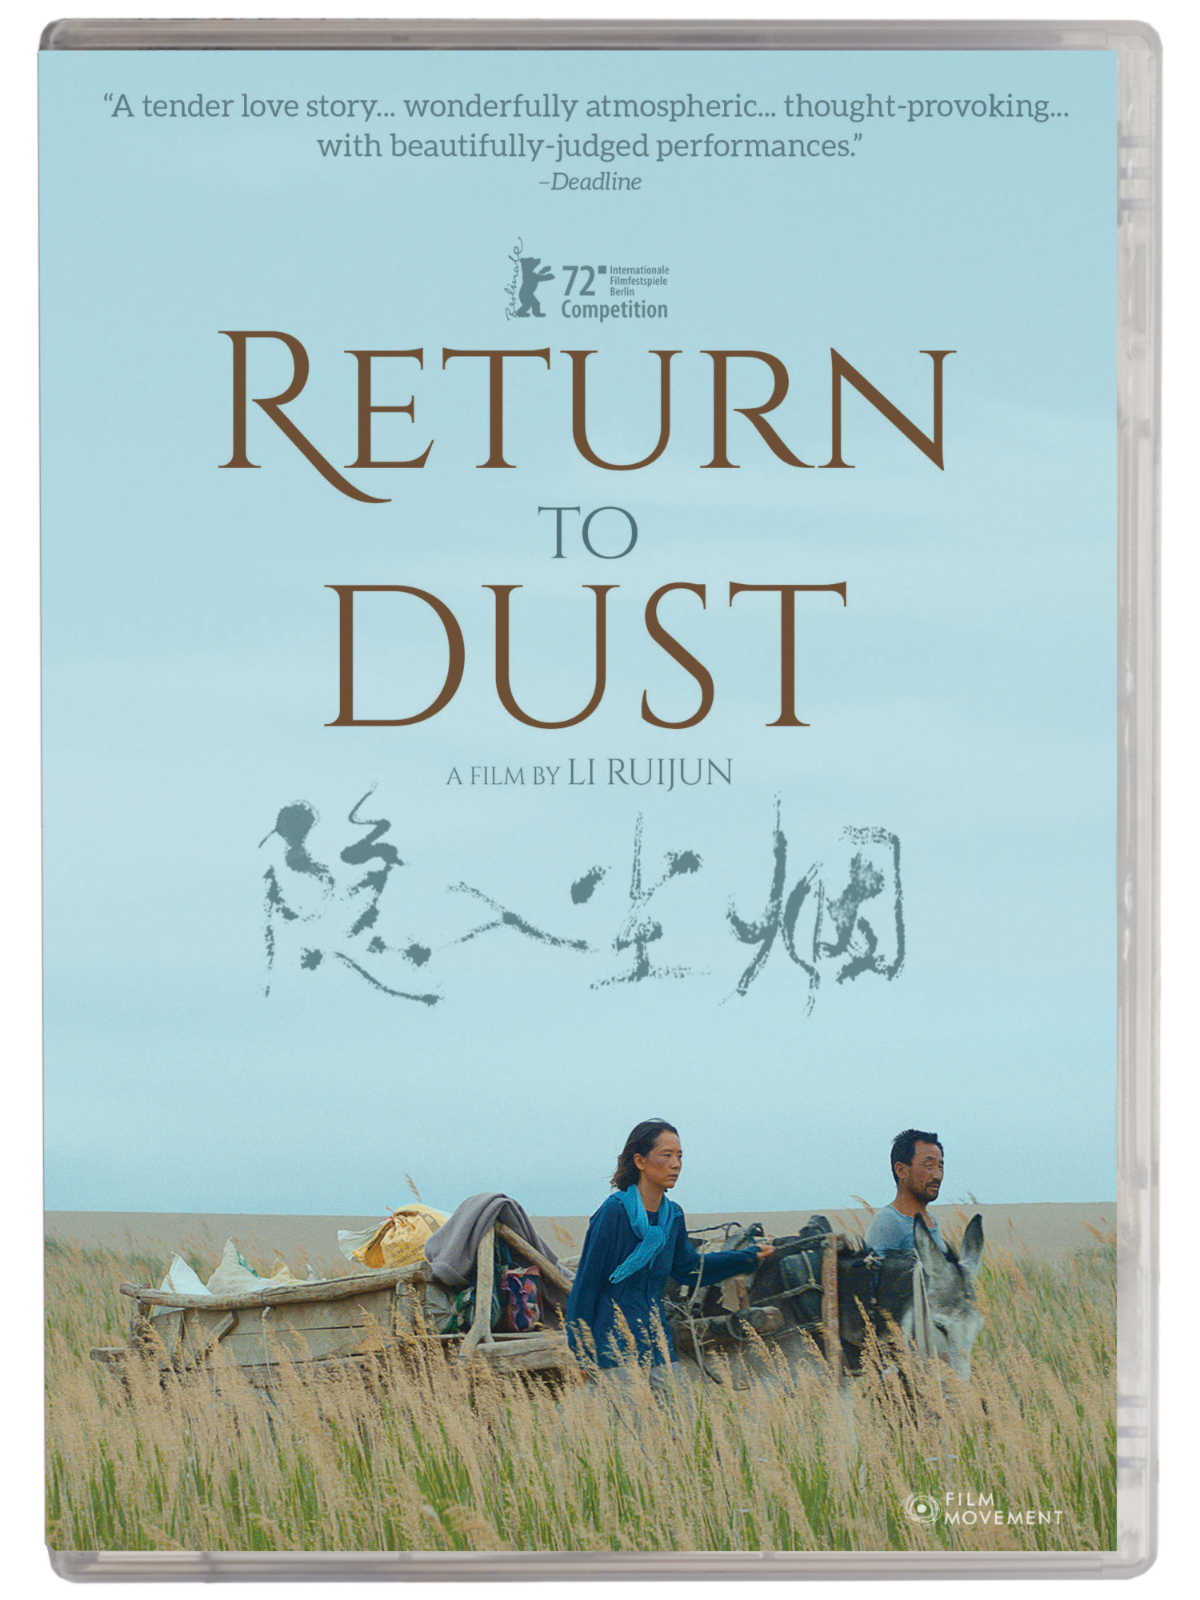 Return to Dust is a tender and moving portrait of rural China, following the story of two lonely, middle-aged people who find love and happiness in the midst of adversity.